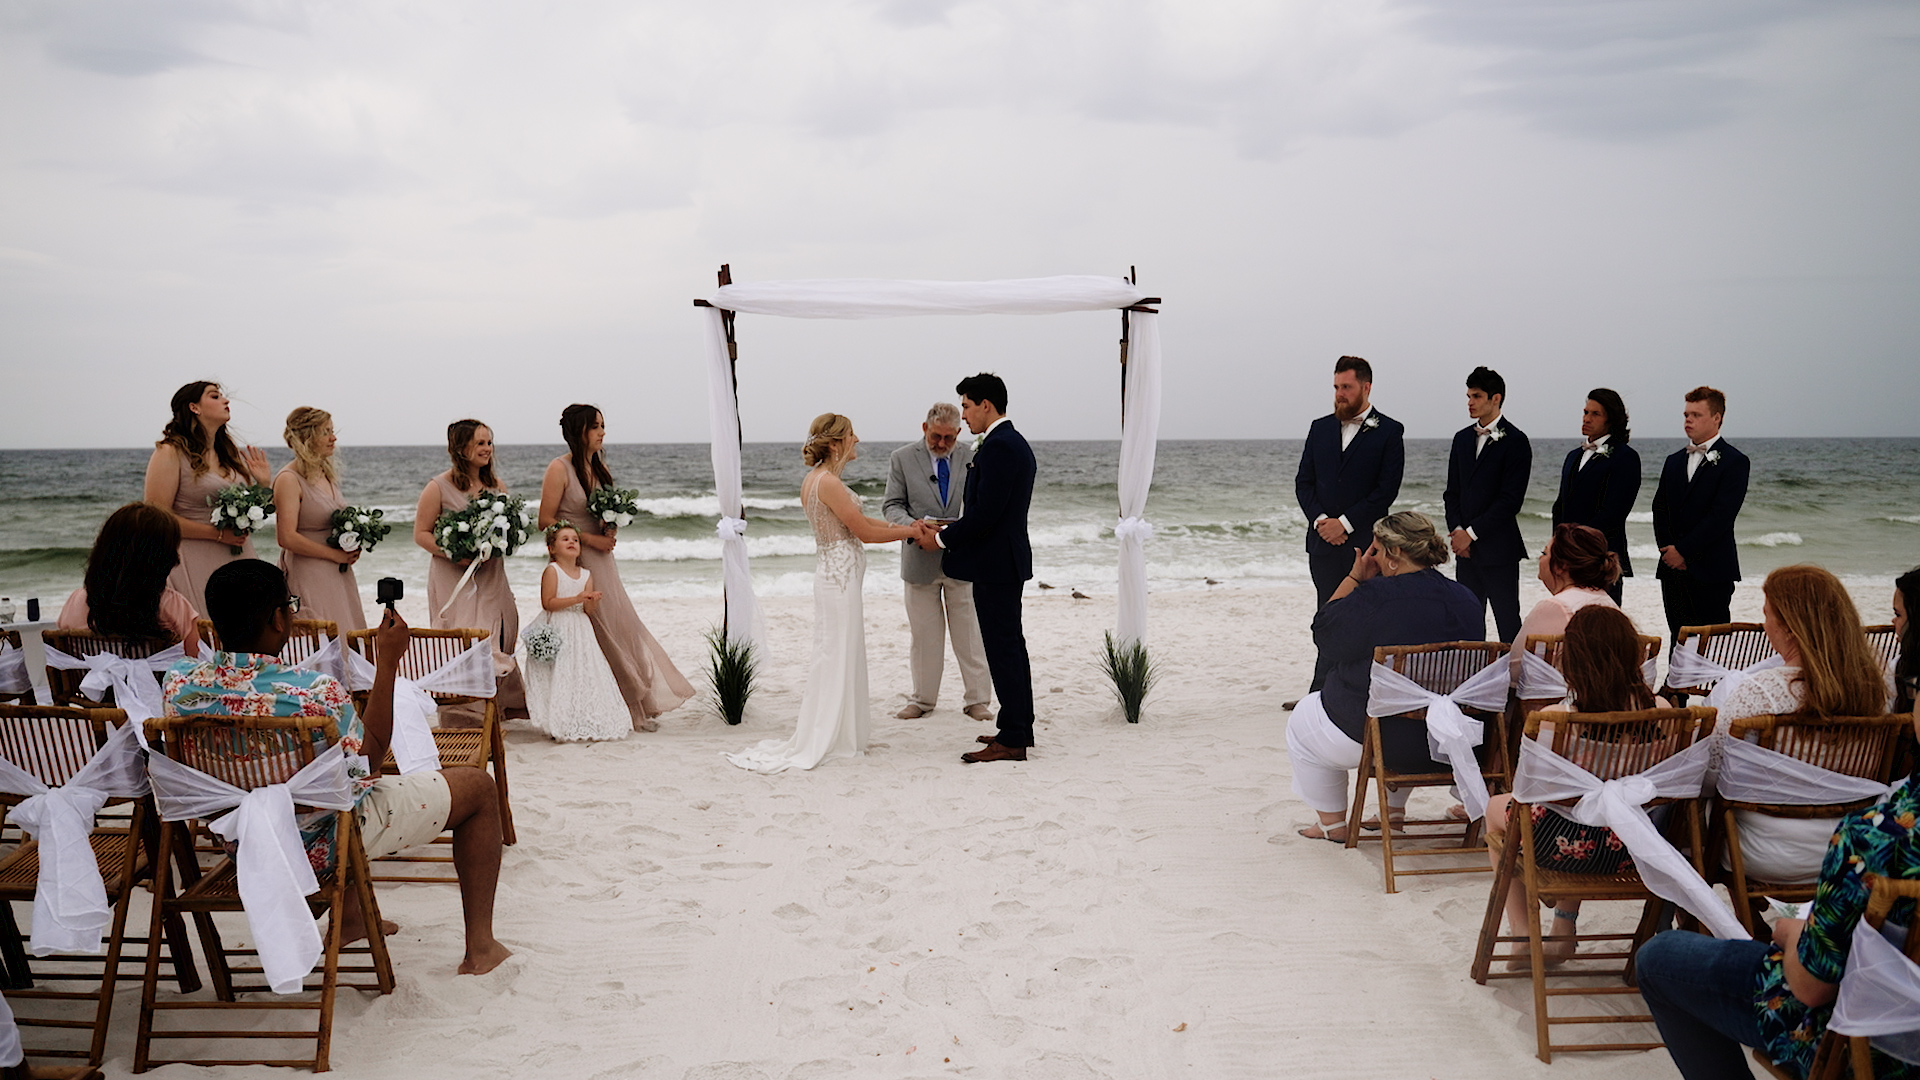 Top 6 Florida Beaches For A Cinematic Bridal Videography Session